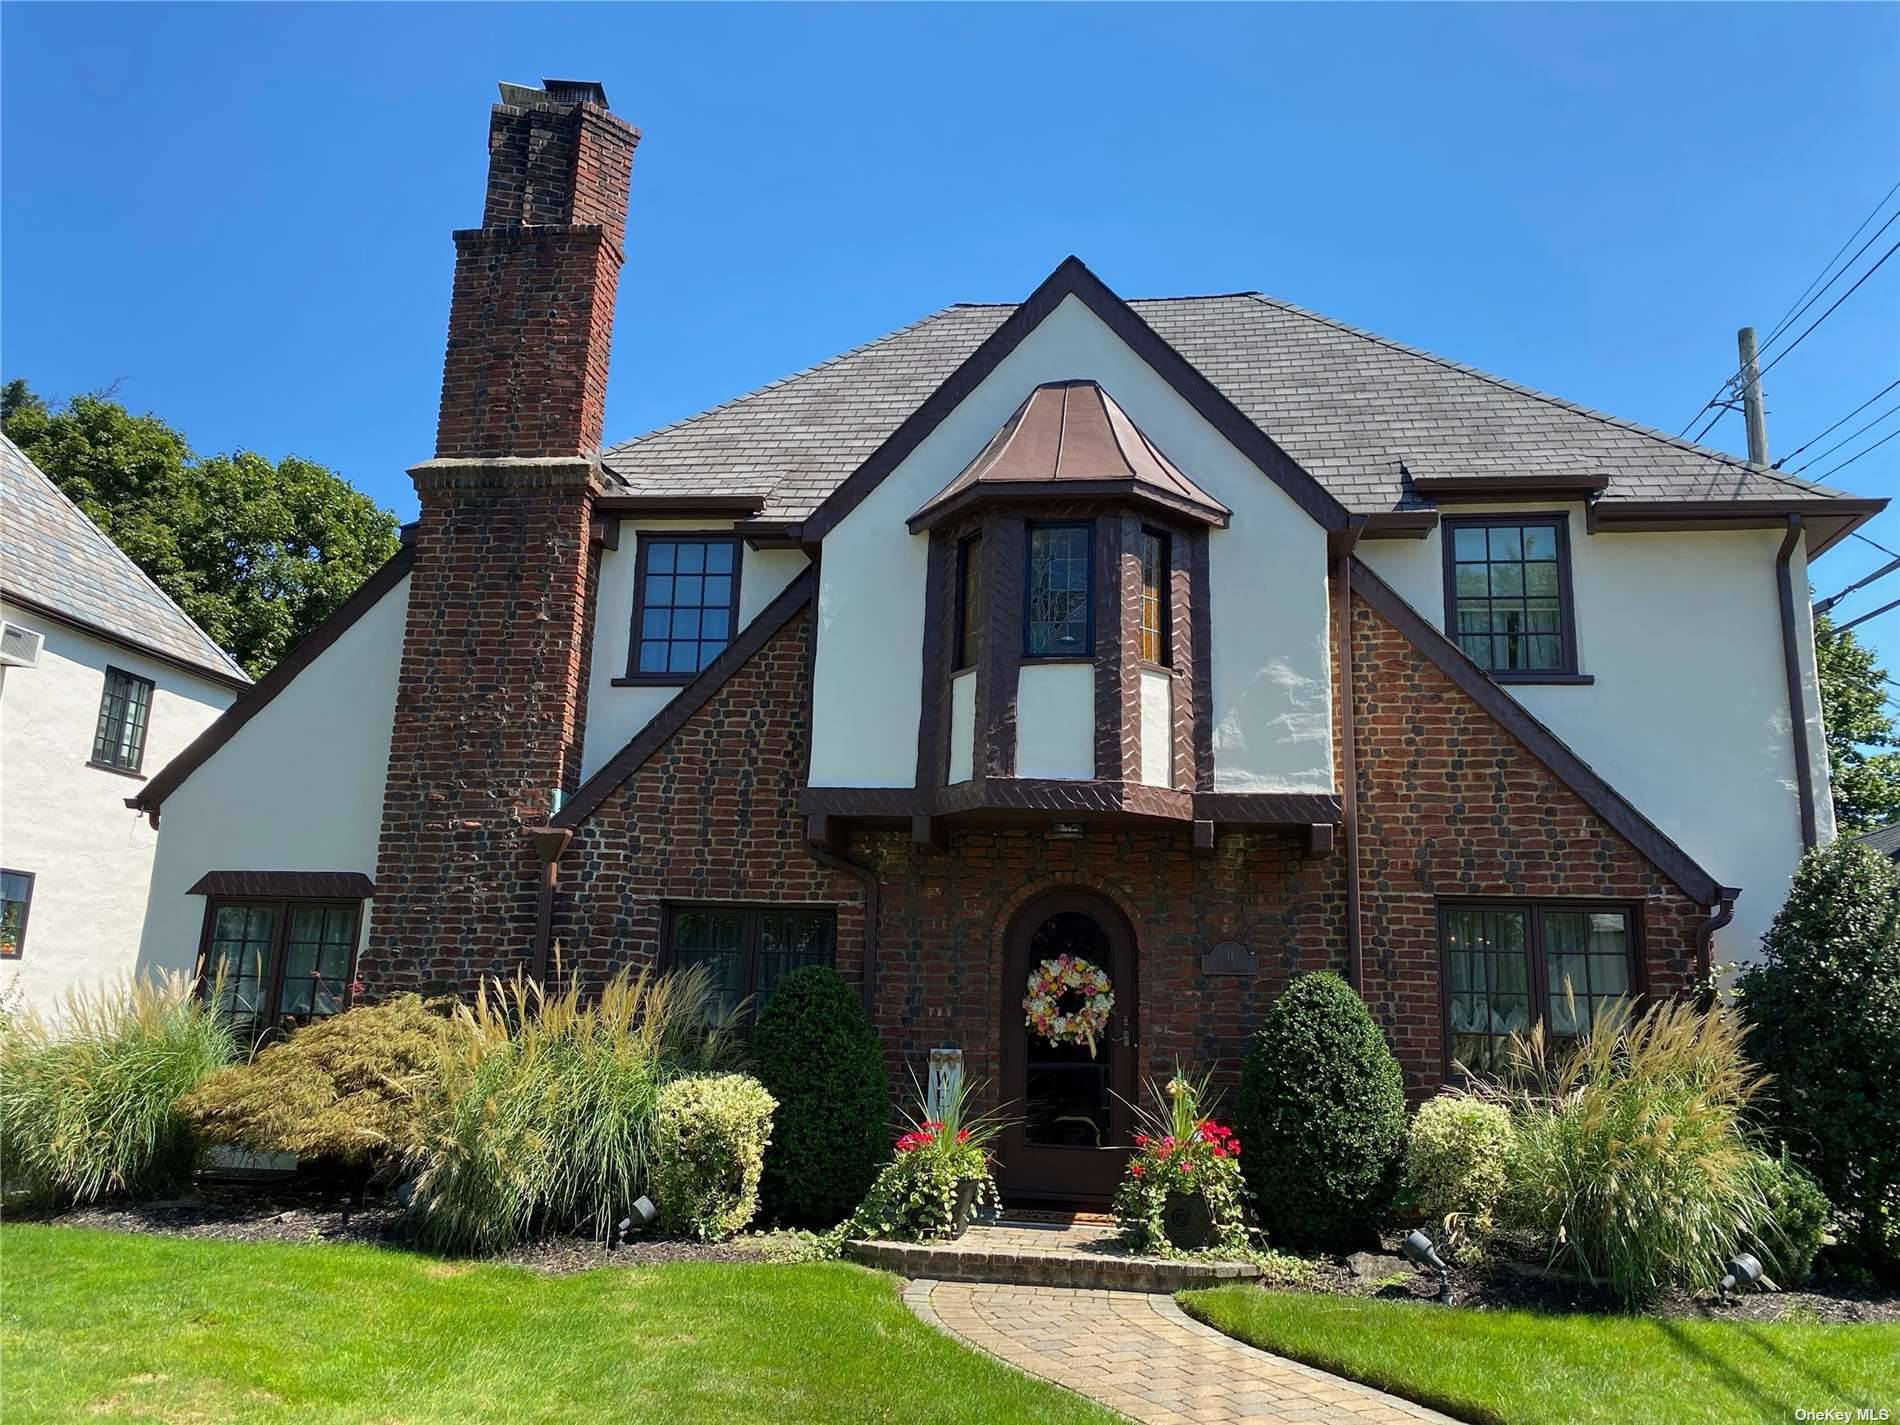 Updated amp ; Spacious this Classic Tudor is ready to move right in !